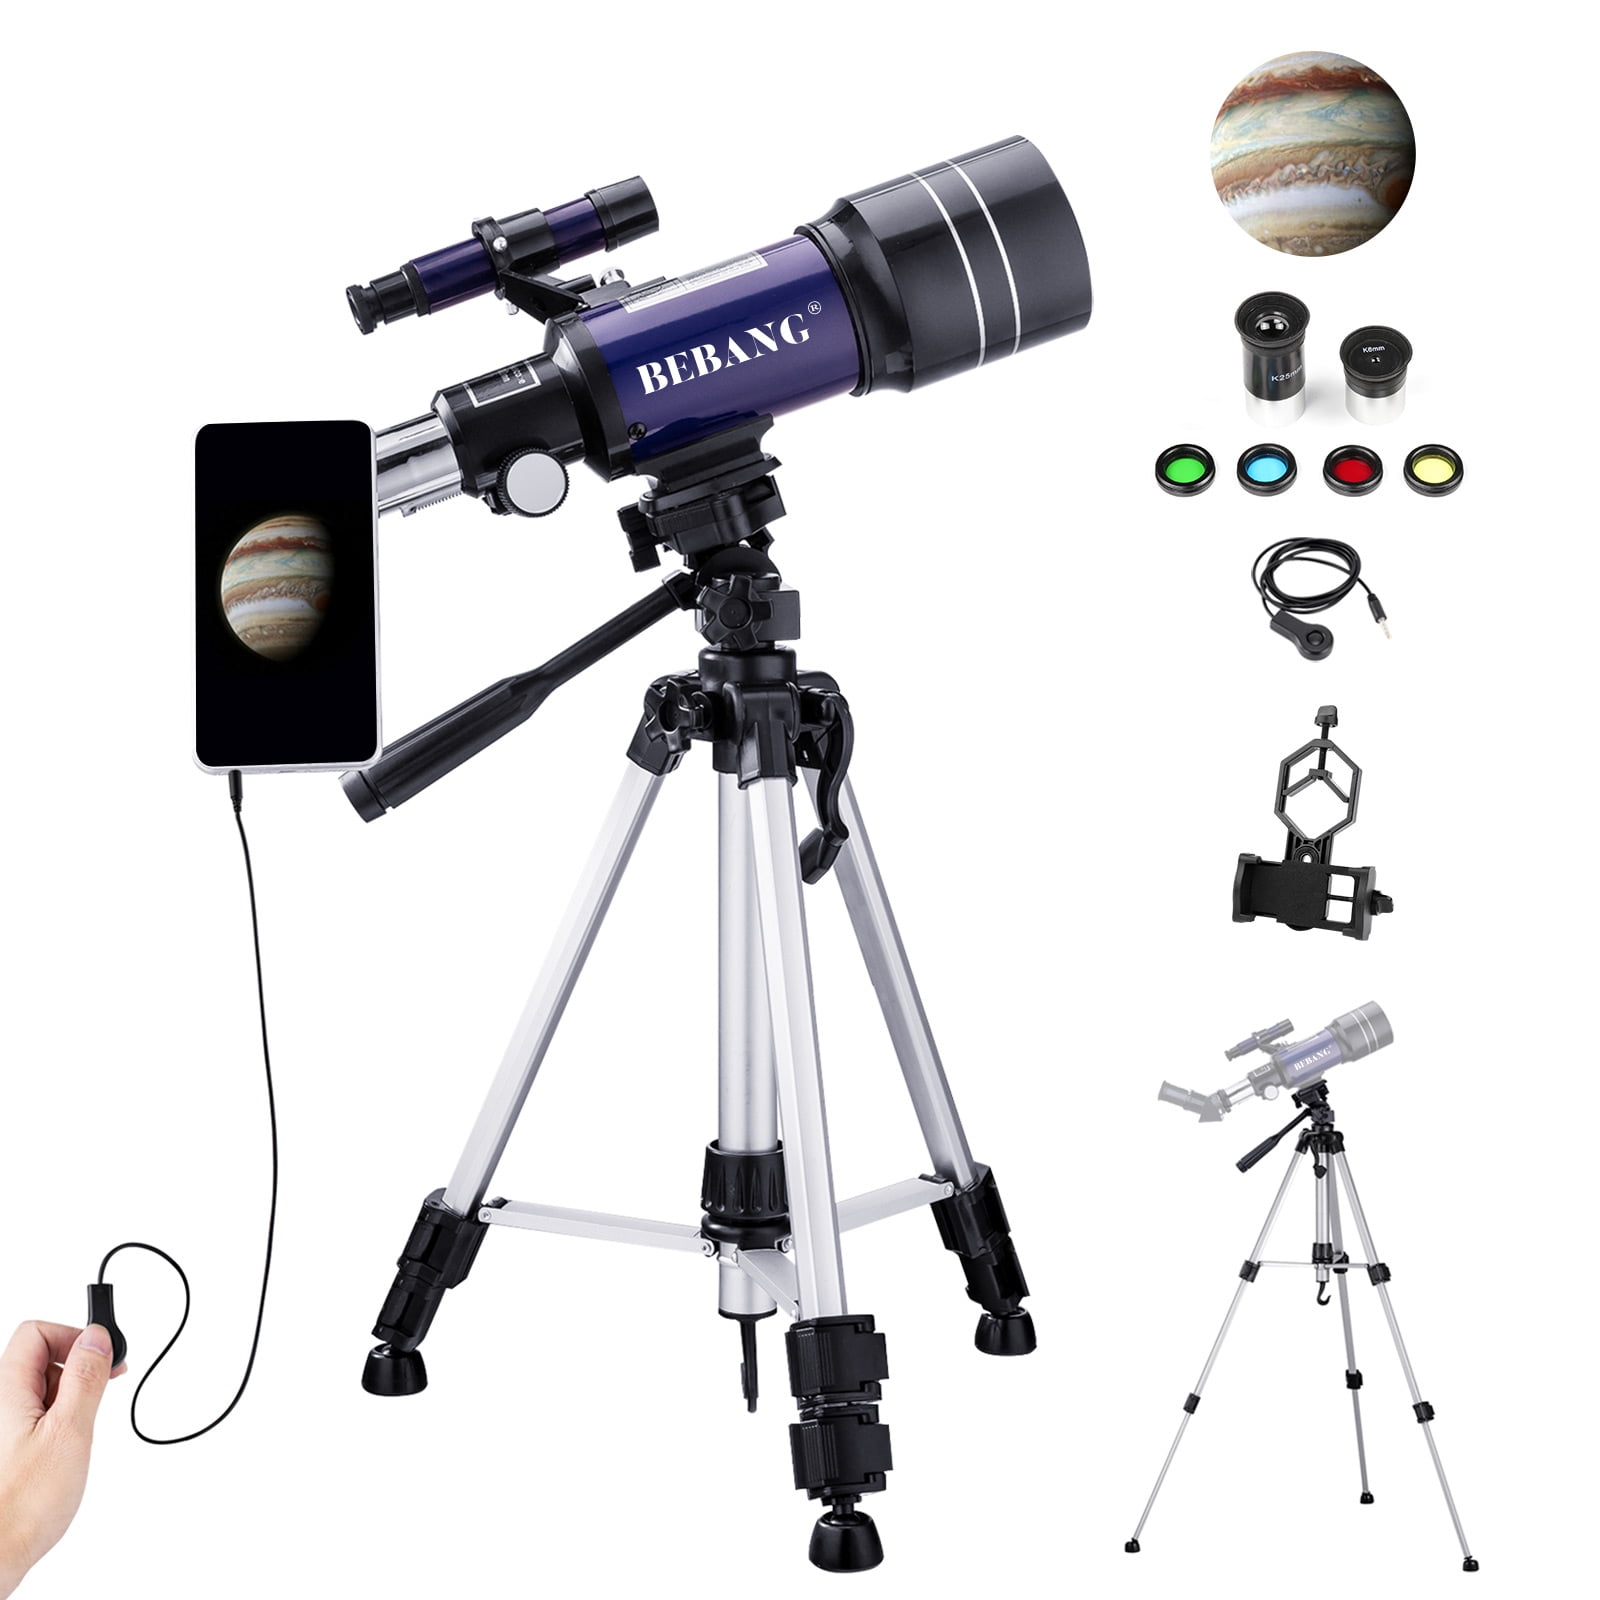 Astronomy Beginners Telescopes Black 70mm Aperture 400mm Astronomy Telescopes for Beginners & Kids & Adults Astronomical Refractor Travel Telescope with Finder Scope & Tripod f/5.7 